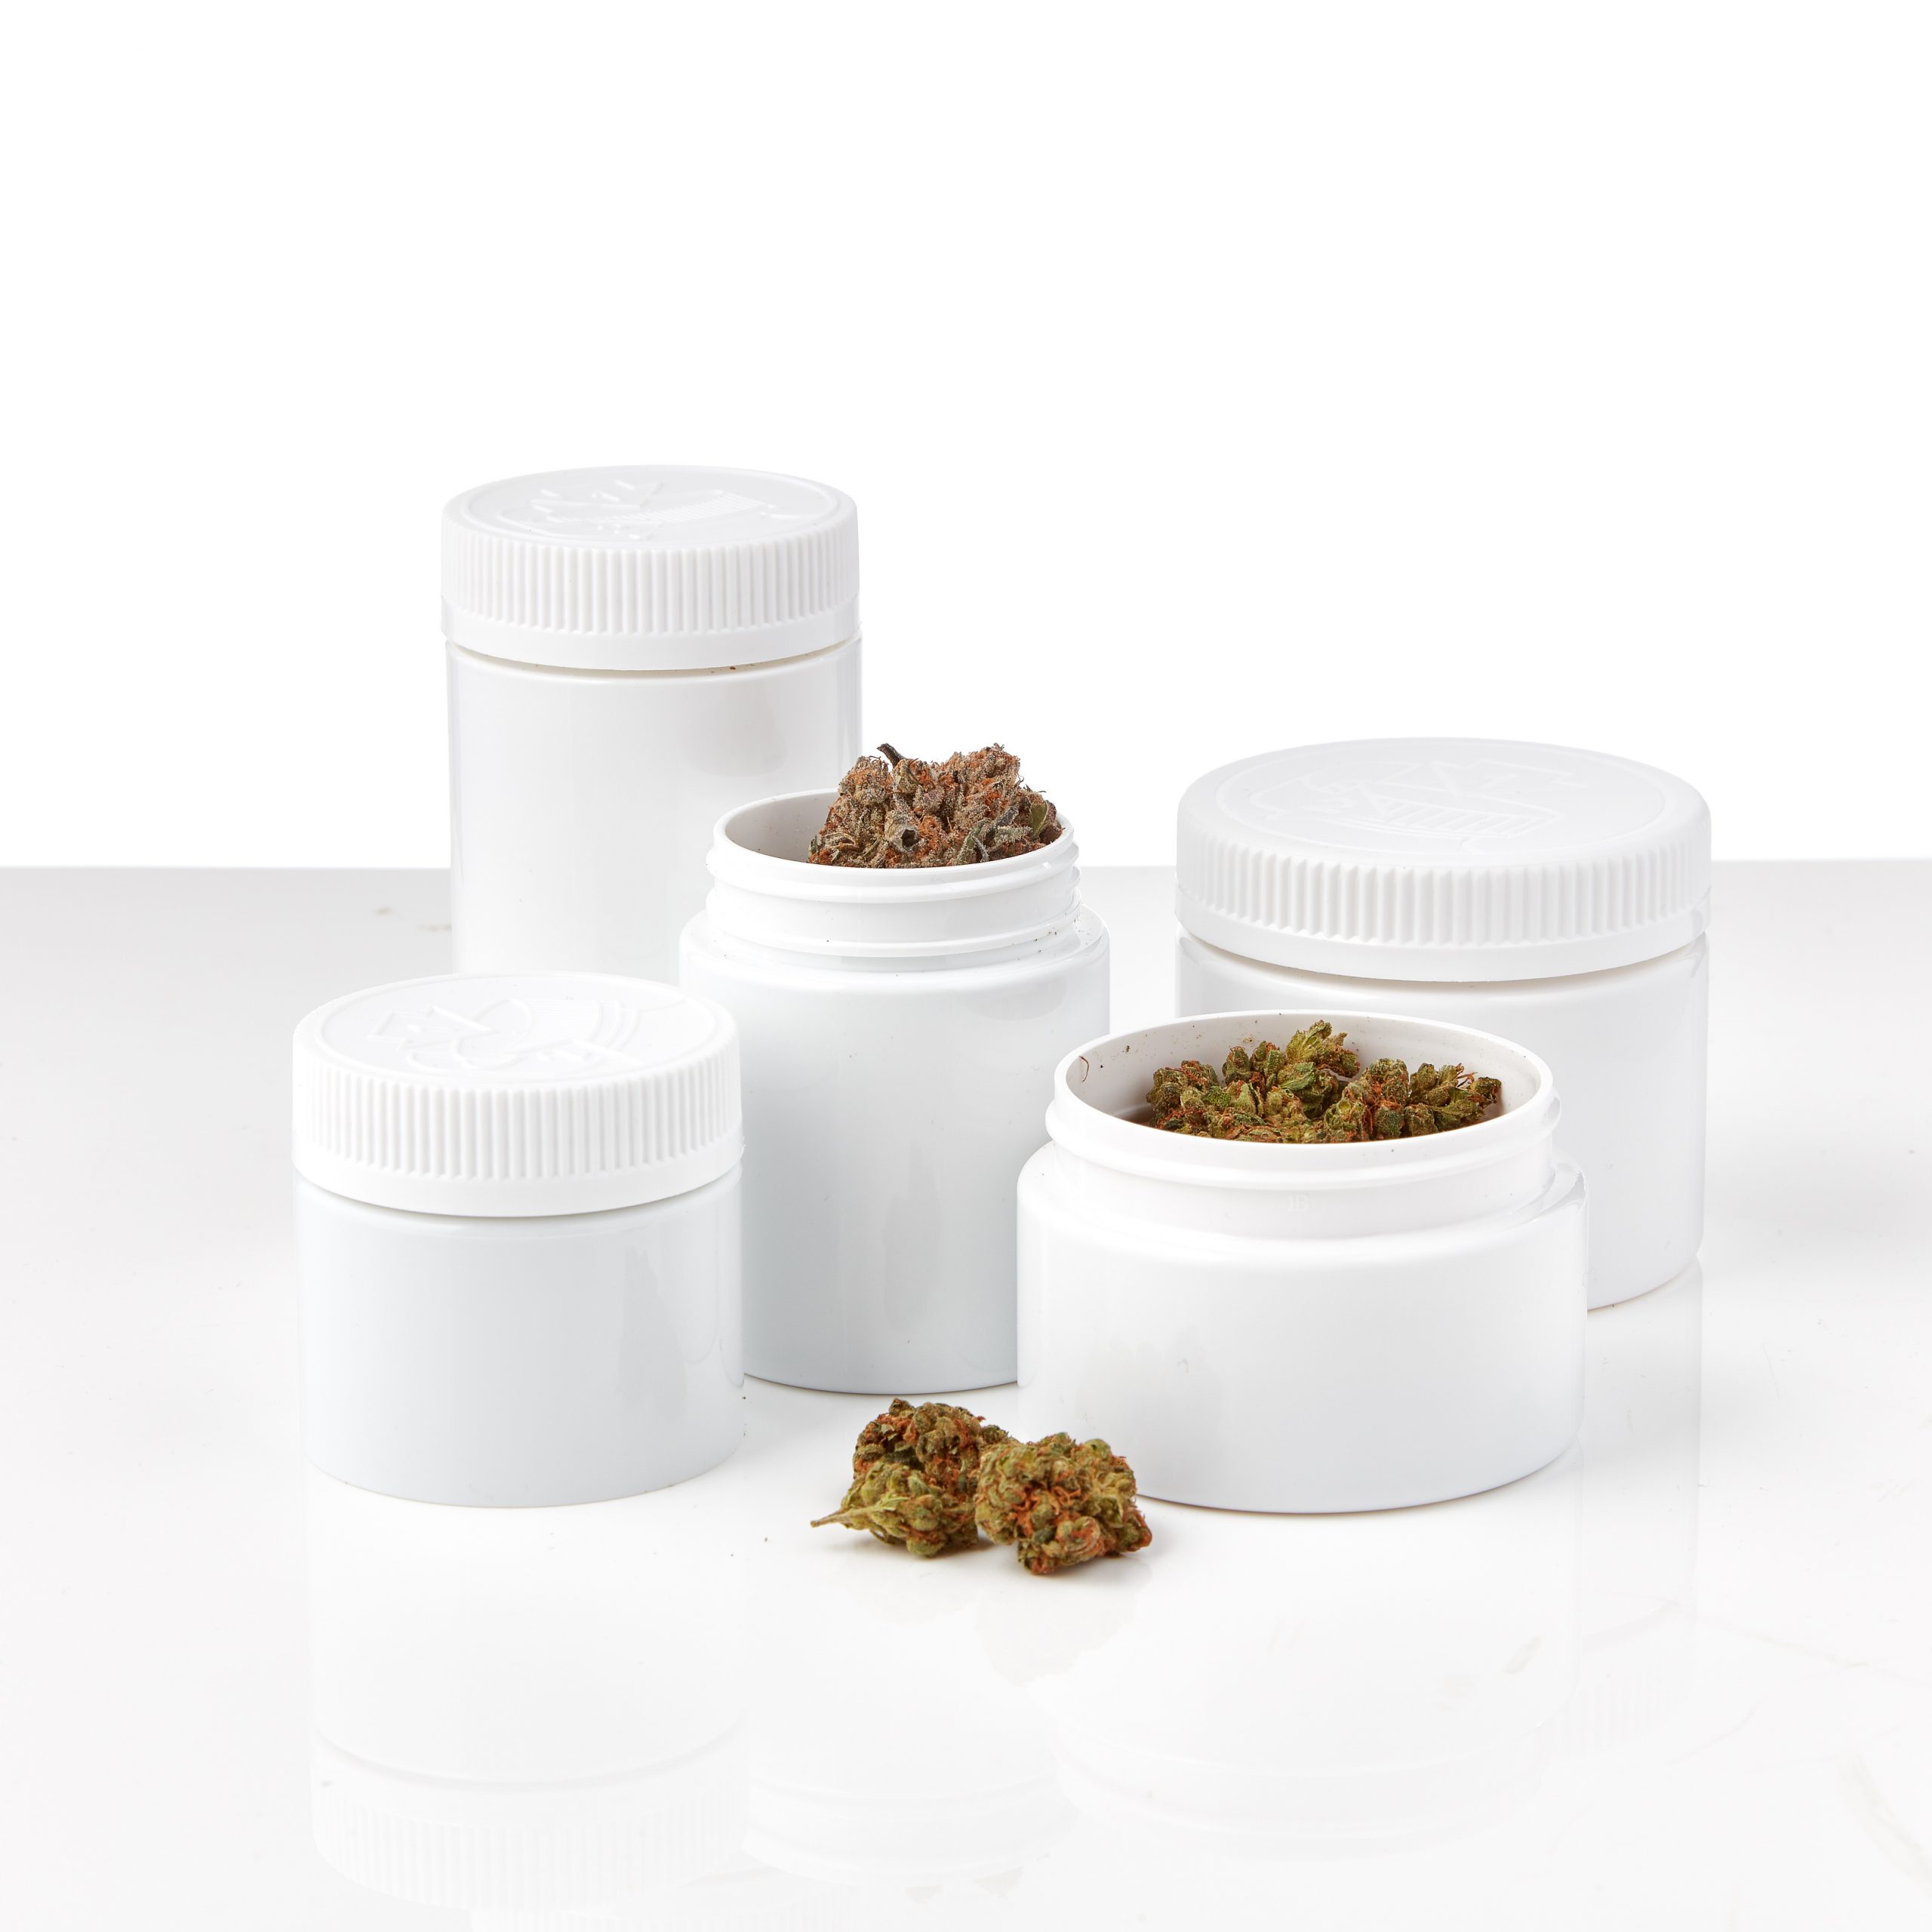 Cannasupplies dried flower PET jars and compatible CR closures